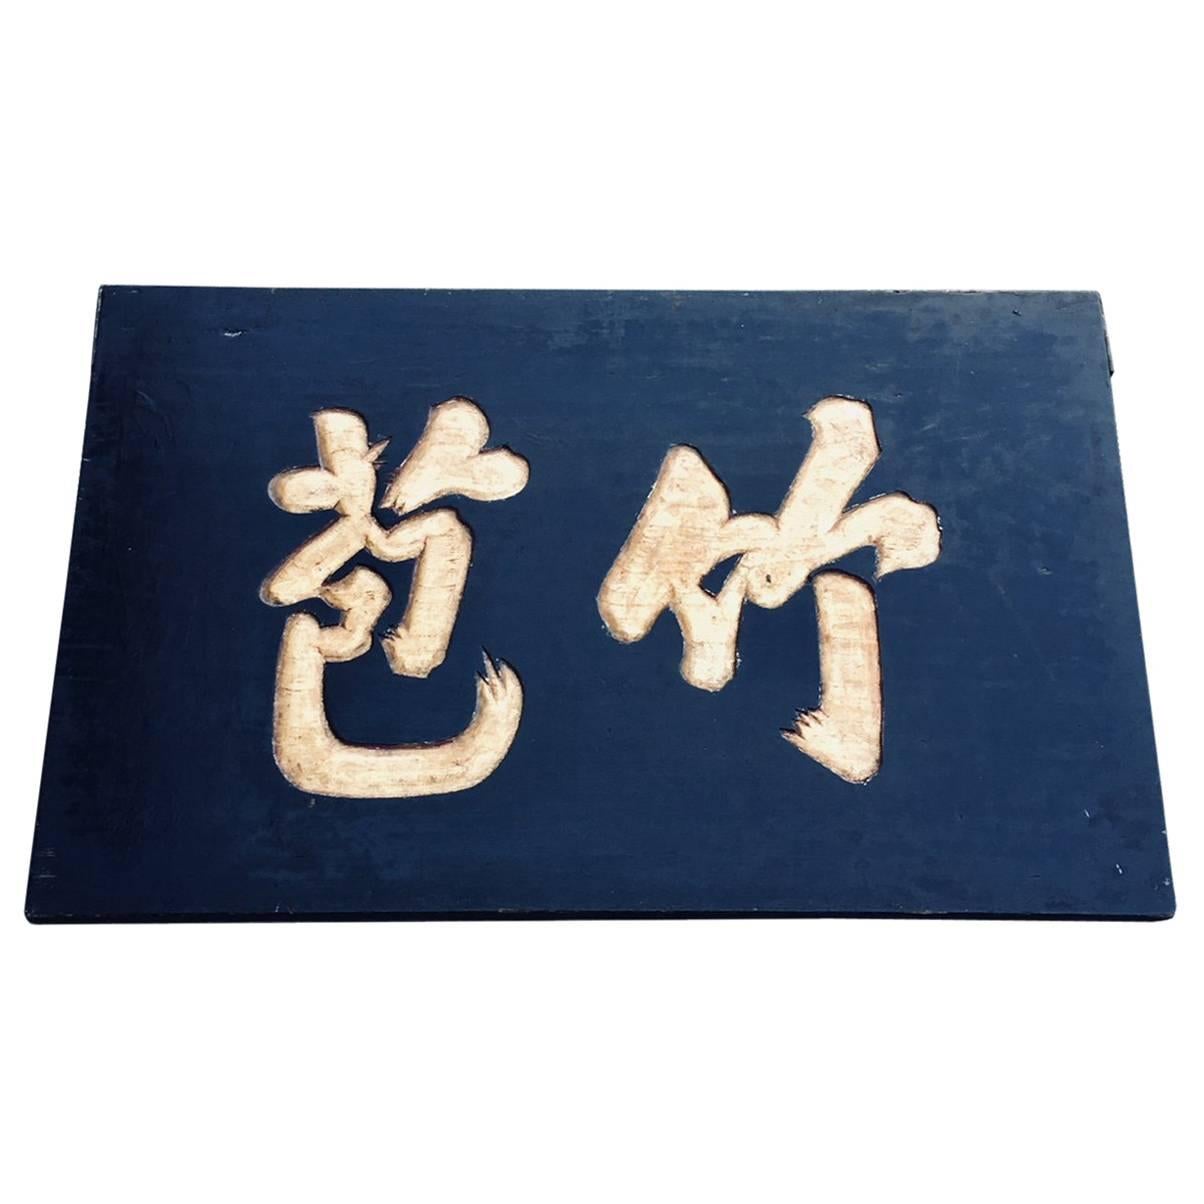 19th Century Chinese Doctor's "Bamboo" Trade Sign